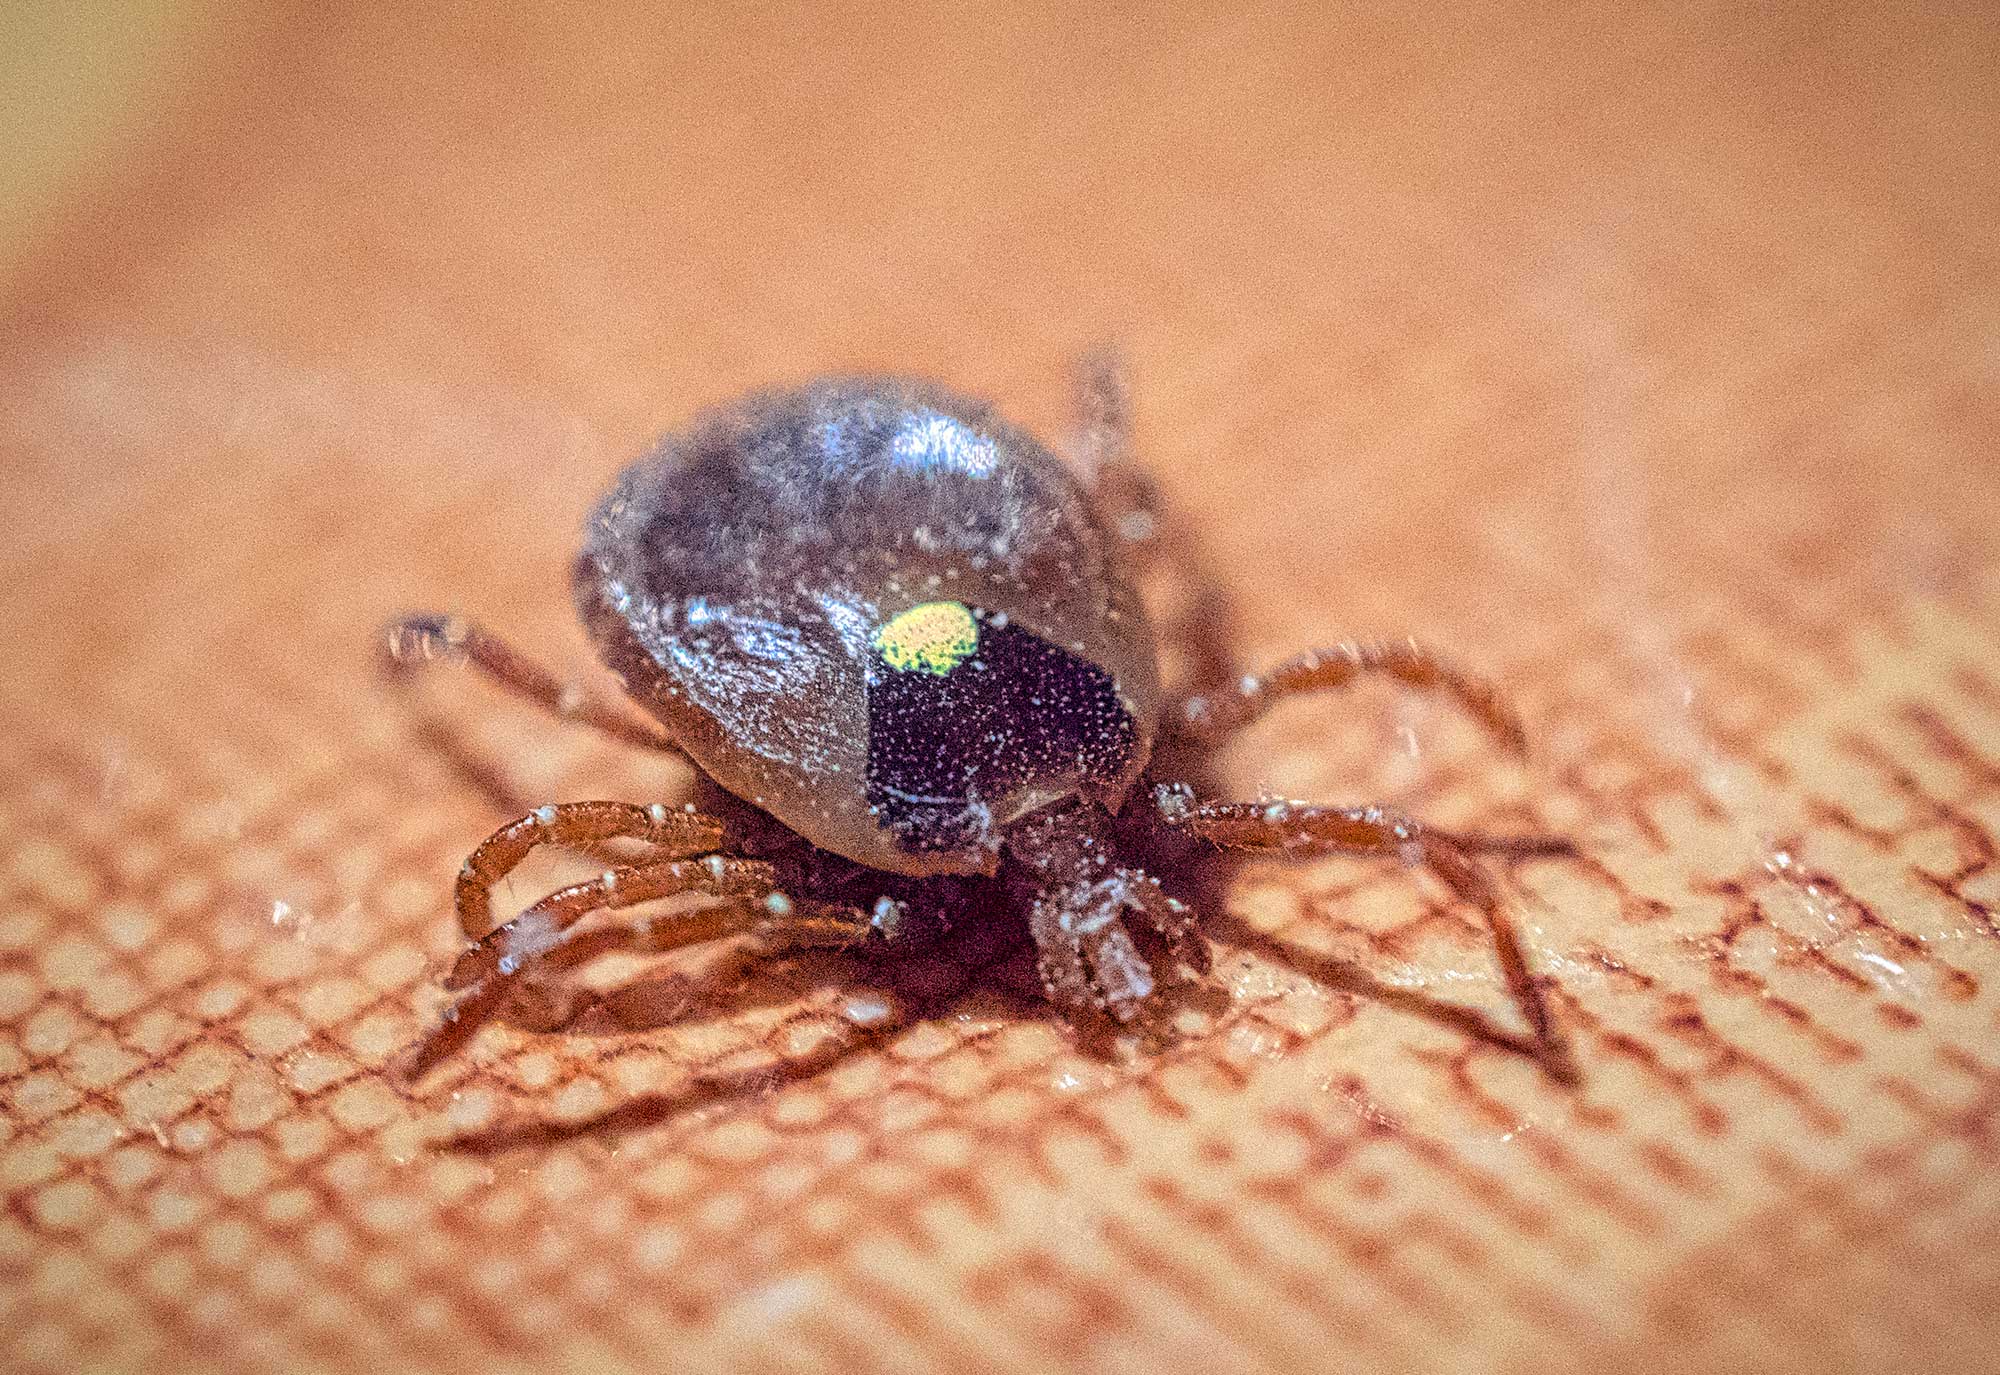 Ticks Diseases and prevention of this appalling arachnid AGDAILY